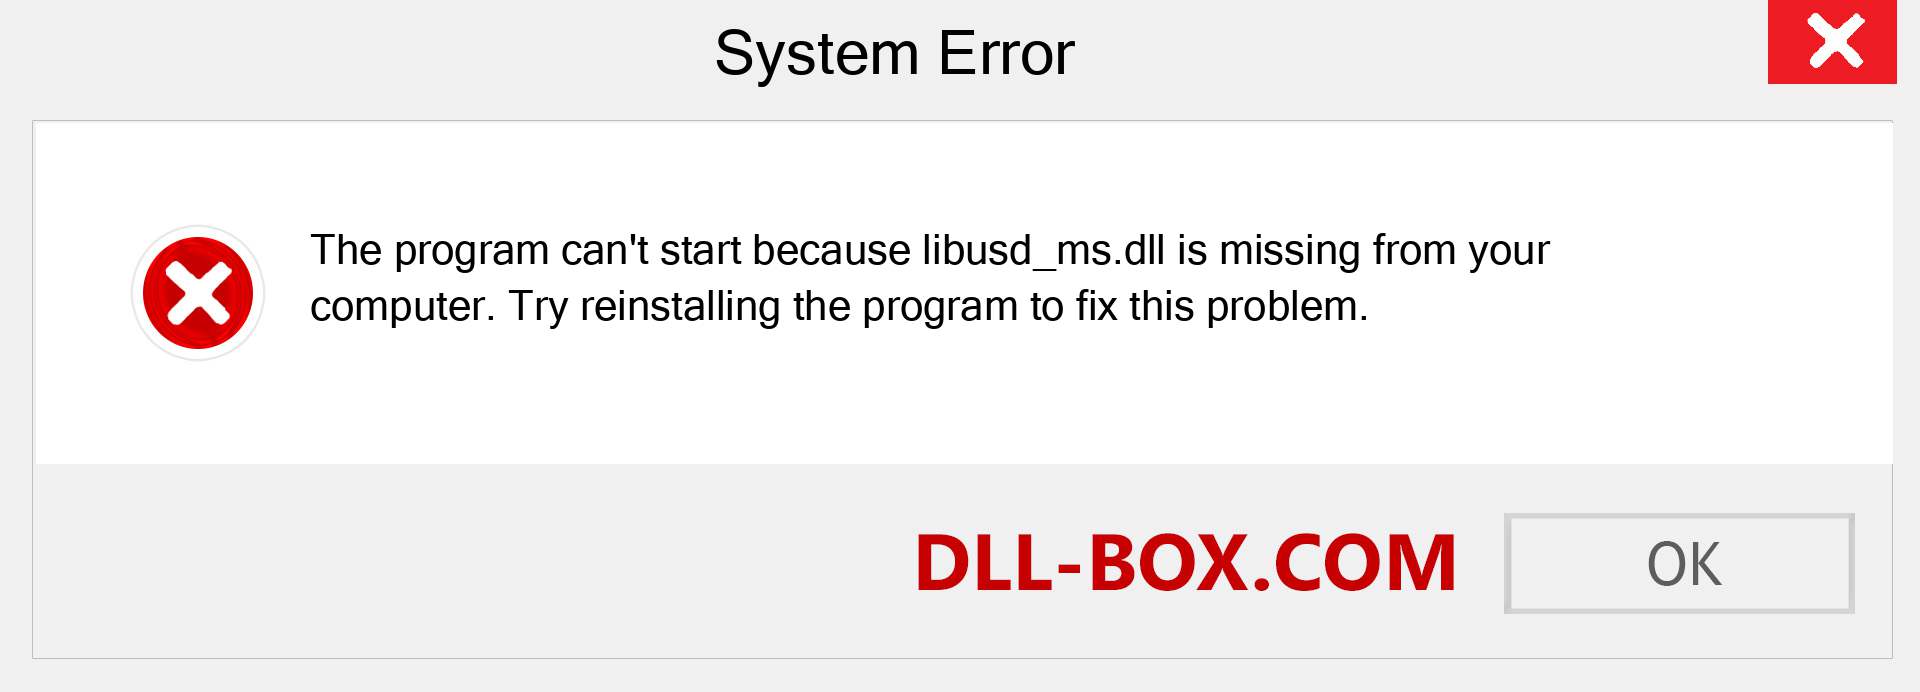  libusd_ms.dll file is missing?. Download for Windows 7, 8, 10 - Fix  libusd_ms dll Missing Error on Windows, photos, images